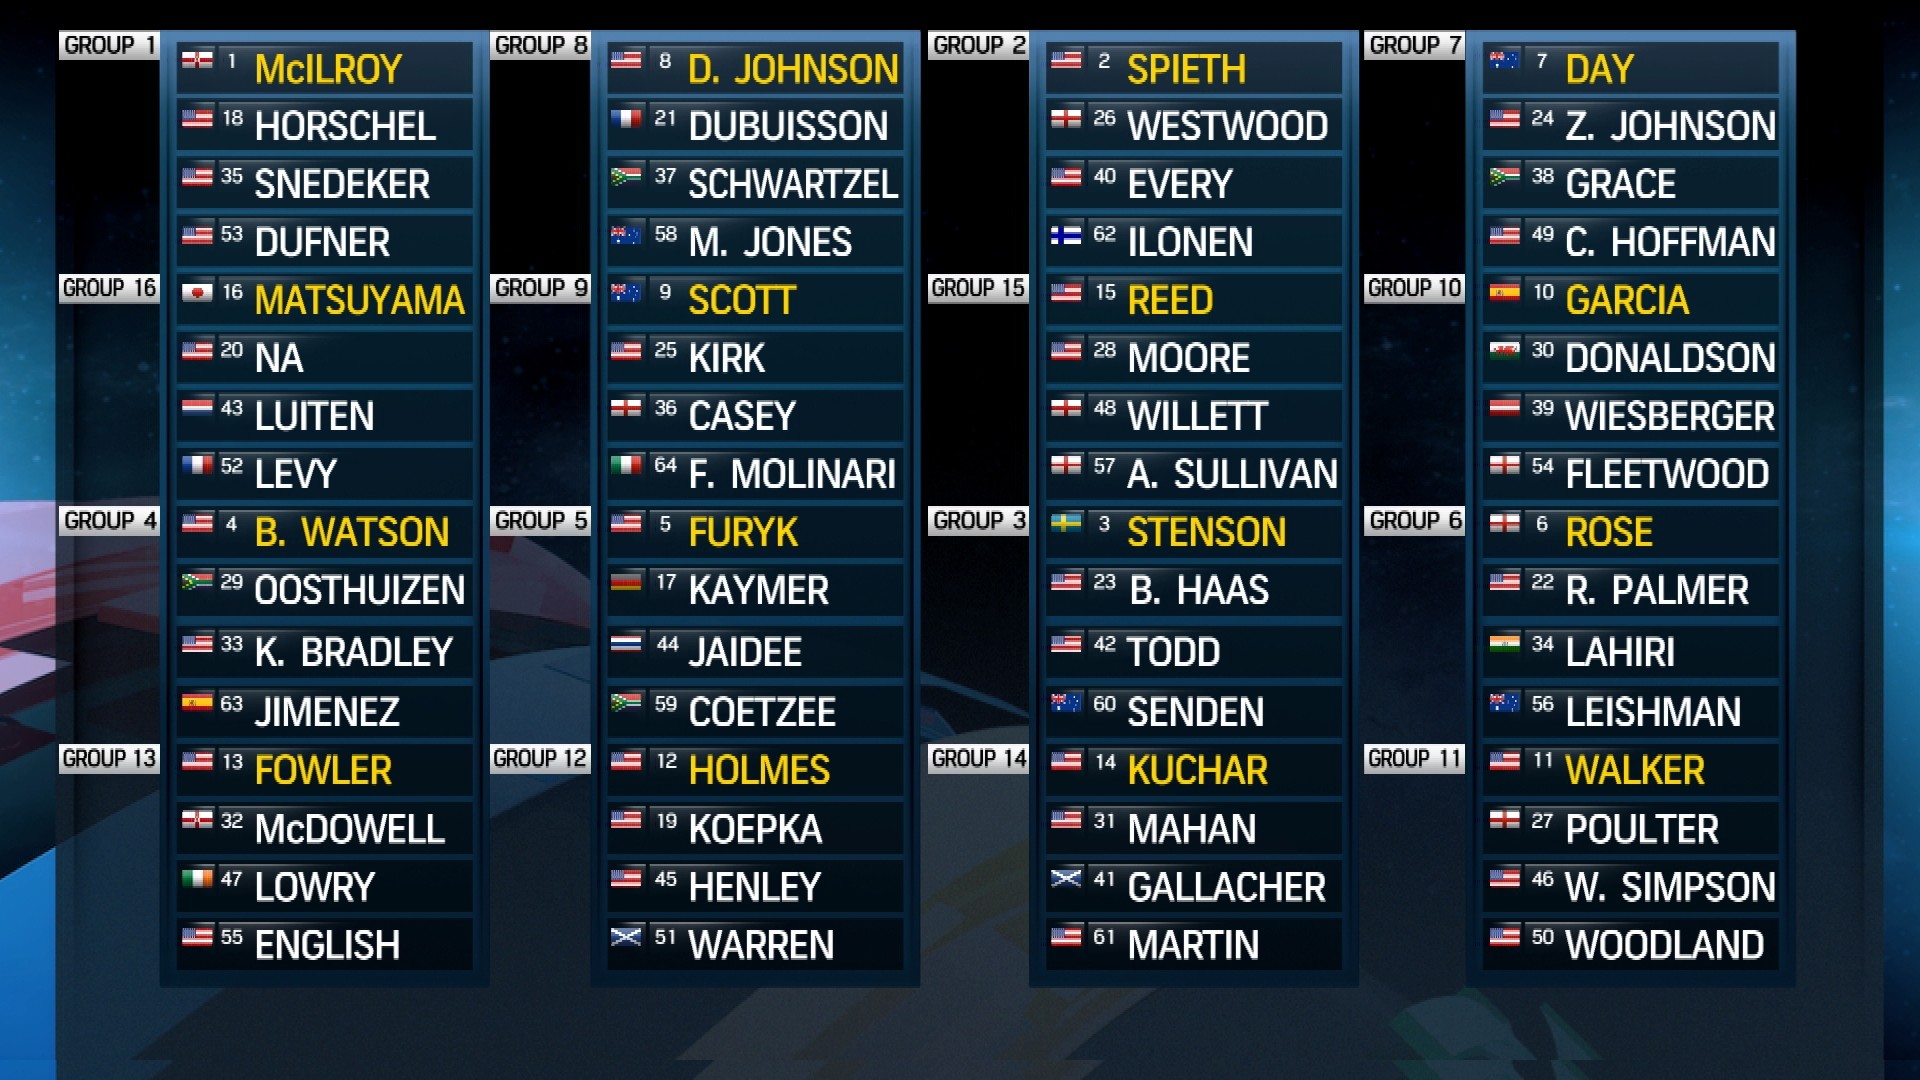 Bracketology for the WGC Accenture Match Play